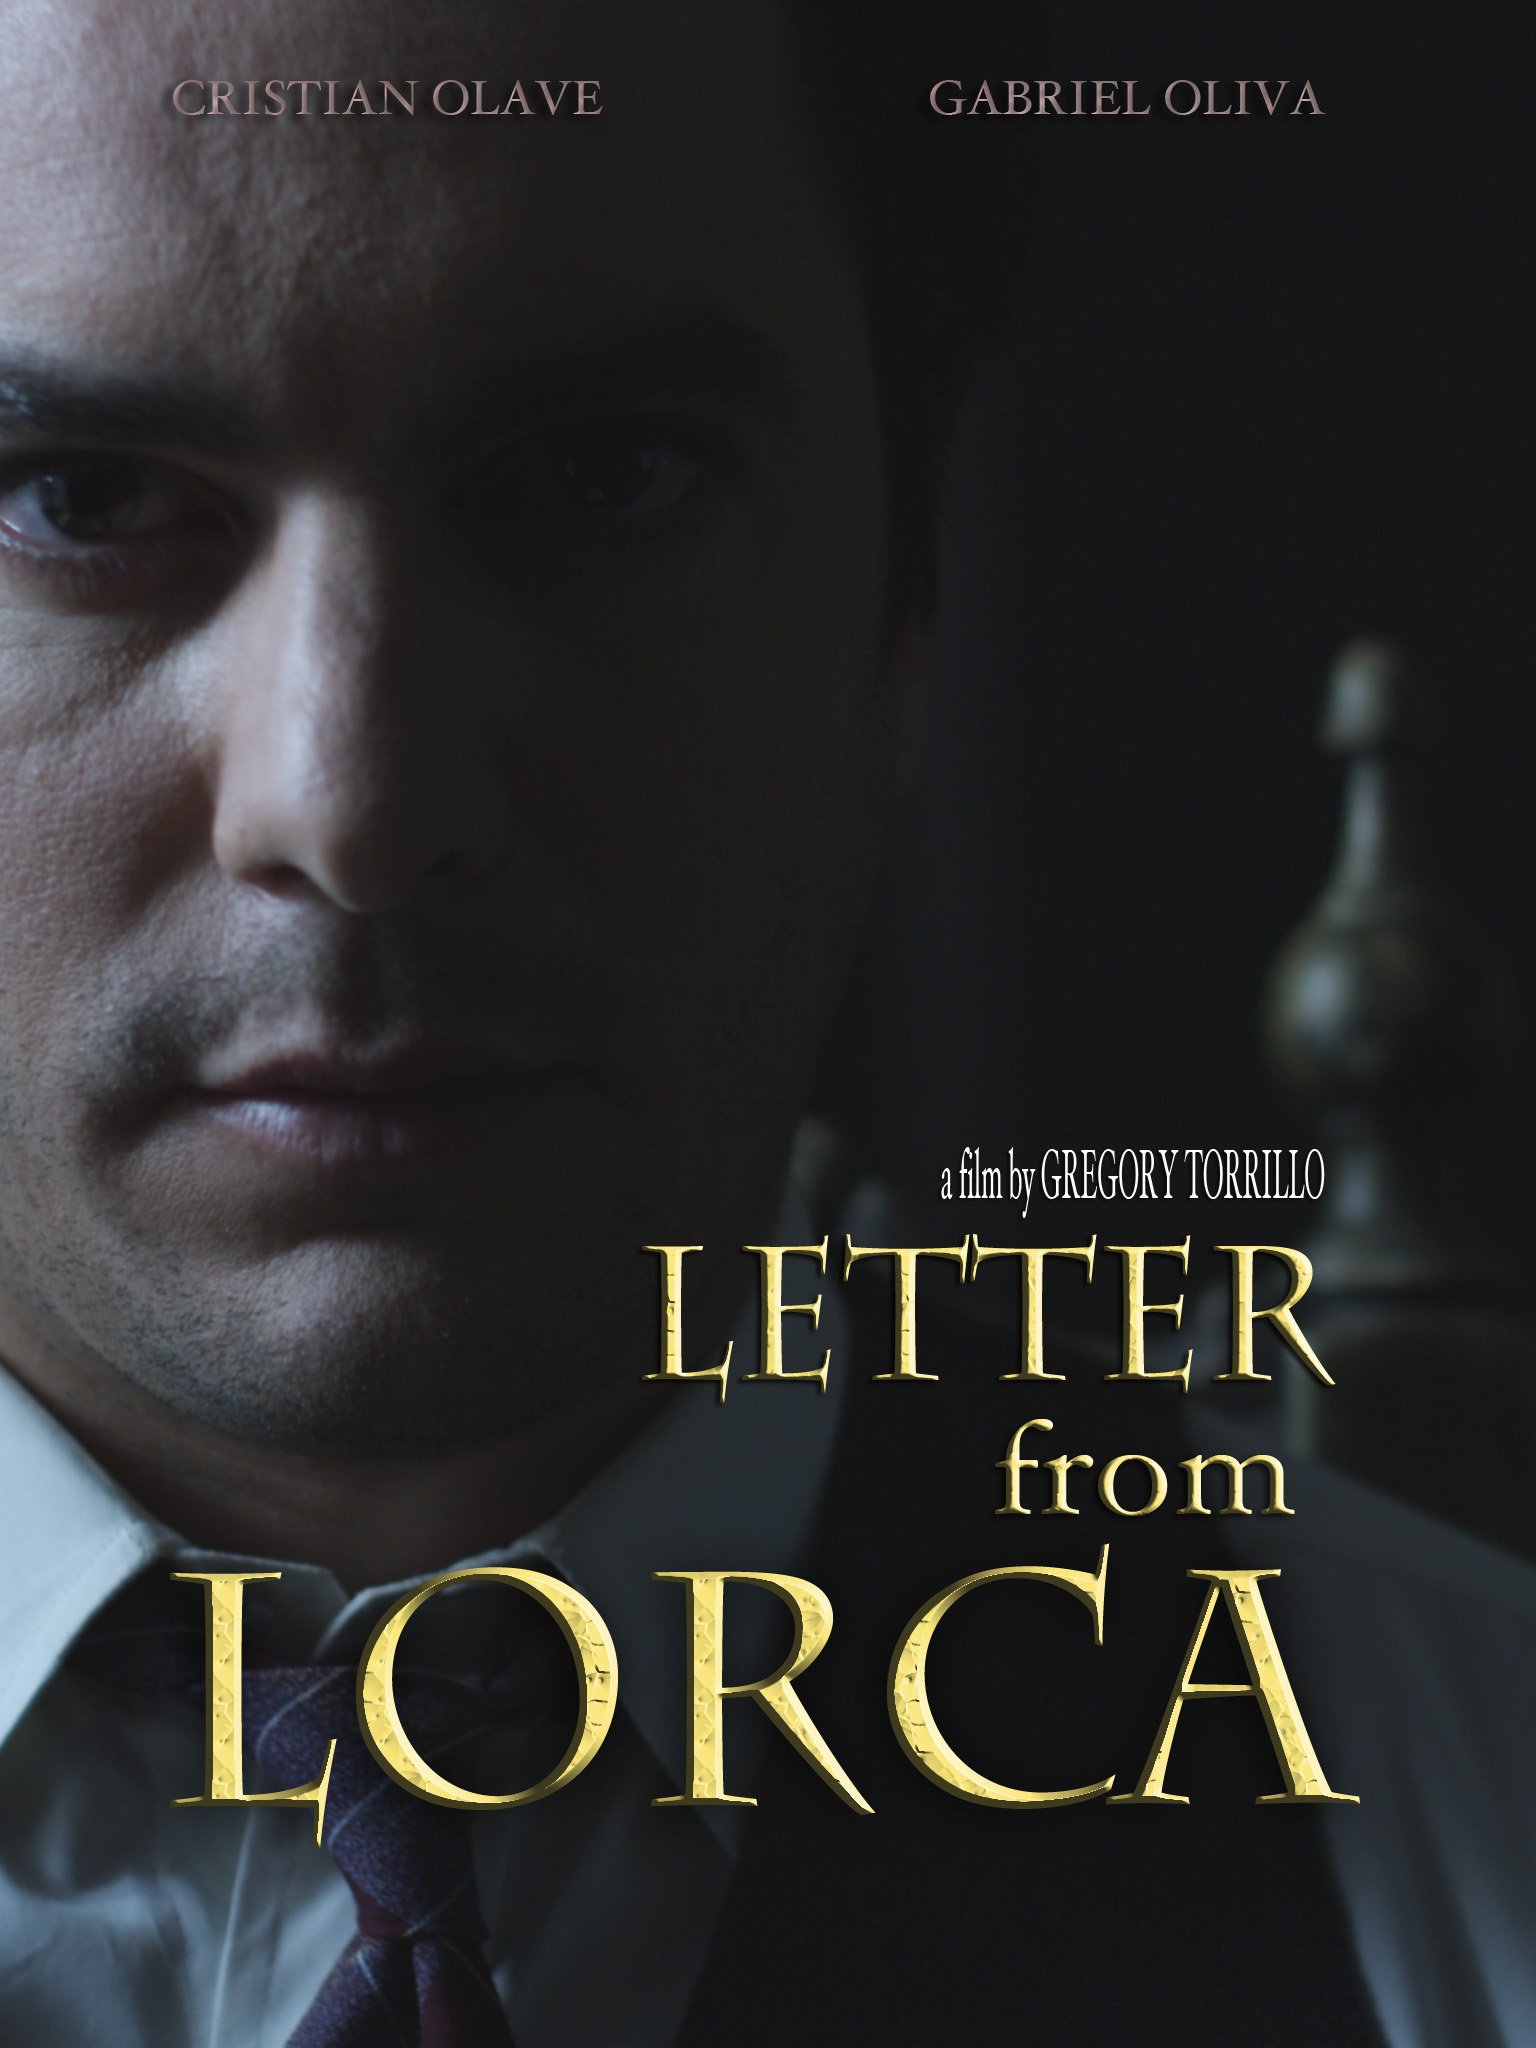 Фото - Letter from Lorca: 1536x2048 / 238 Кб